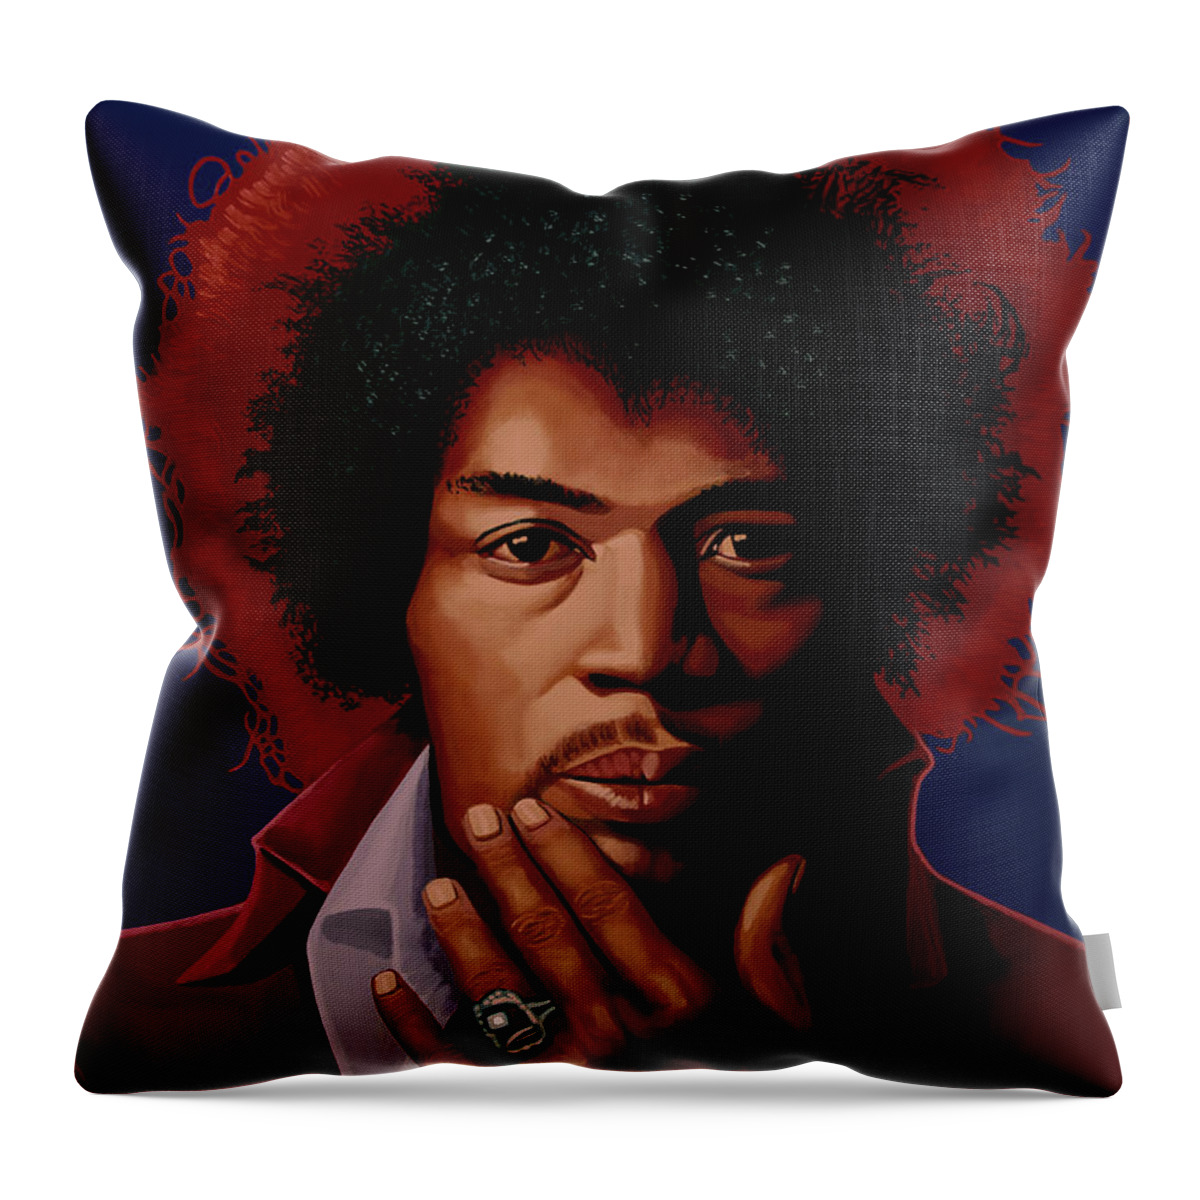 Jimi Hendrix Throw Pillow featuring the painting Jimi Hendrix Painting 5 by Paul Meijering